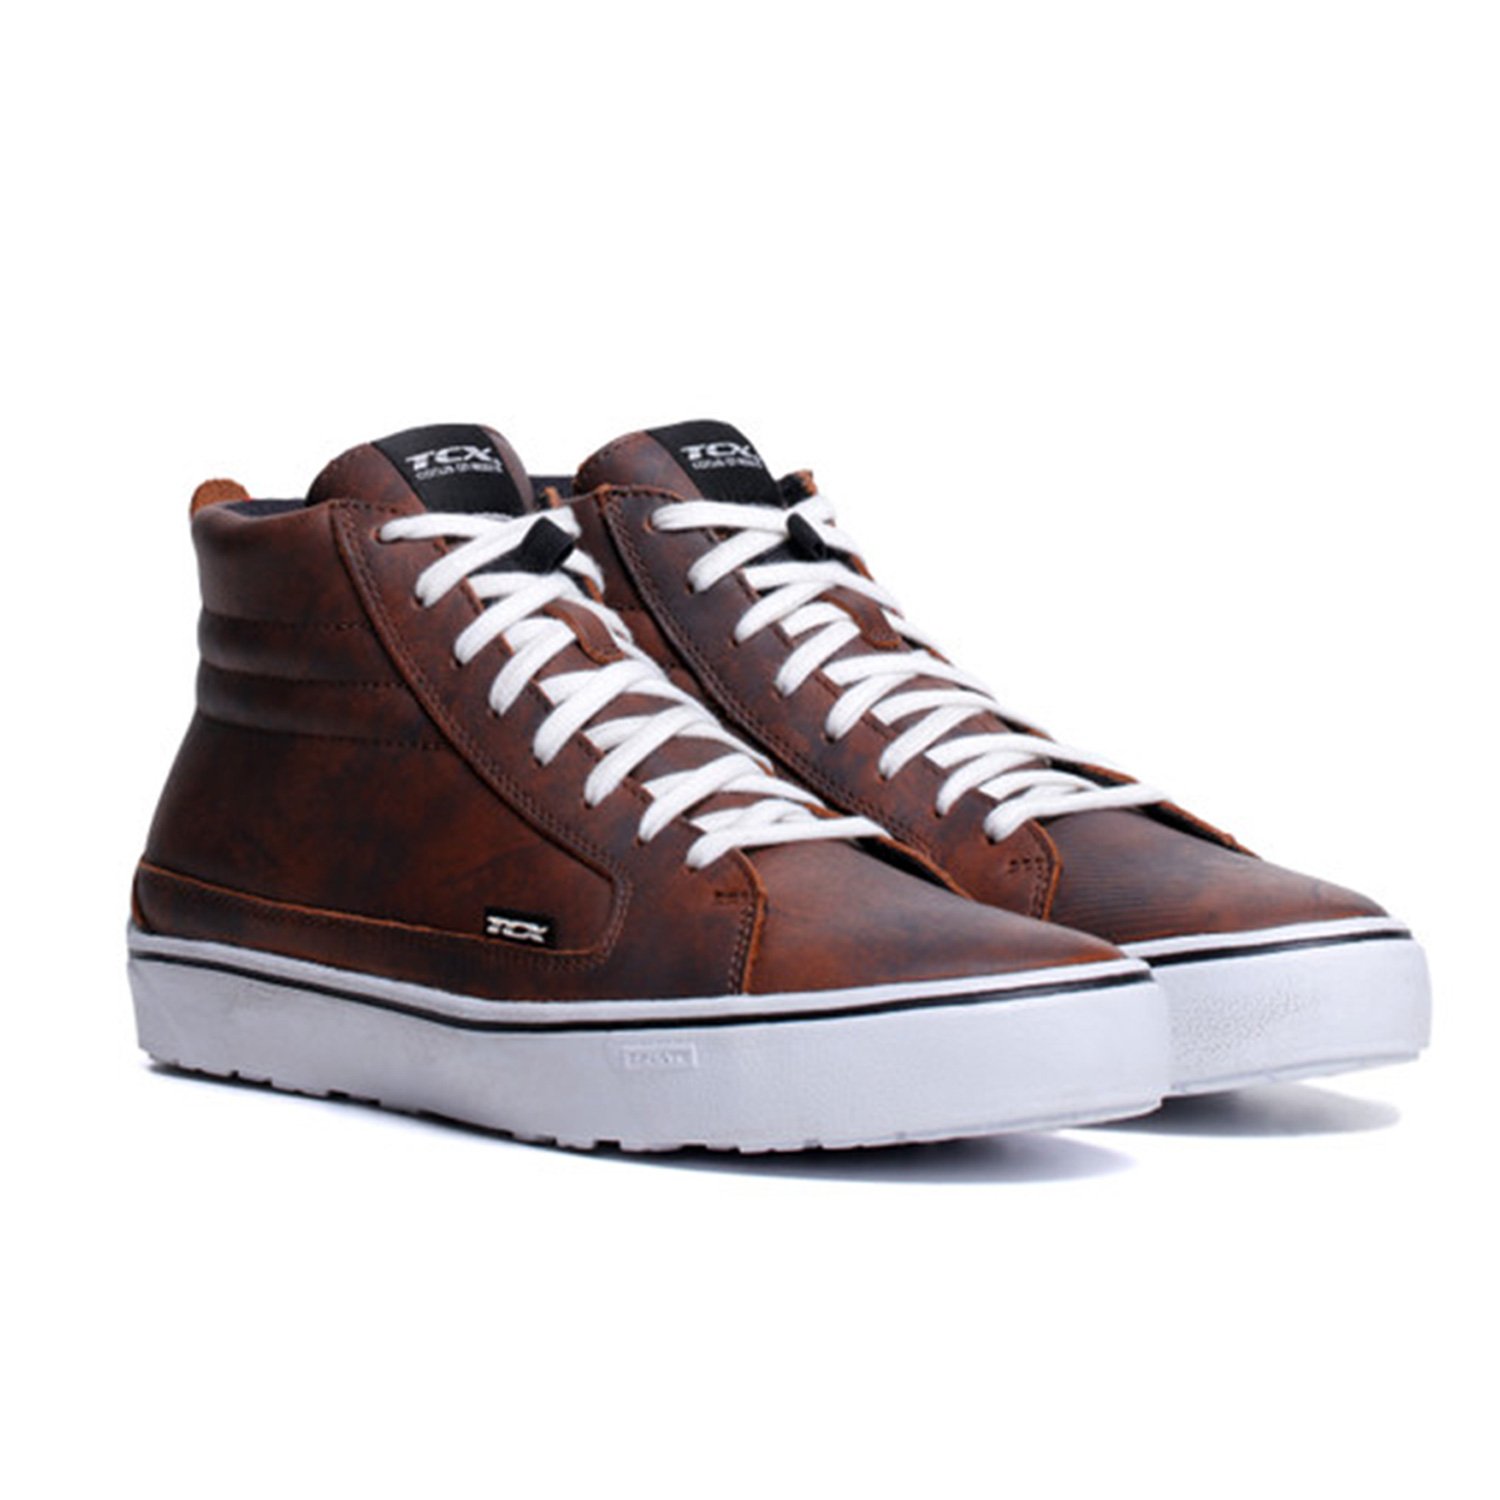 Image of TCX Street 3 WP Marron Blanc Chaussures Taille 42